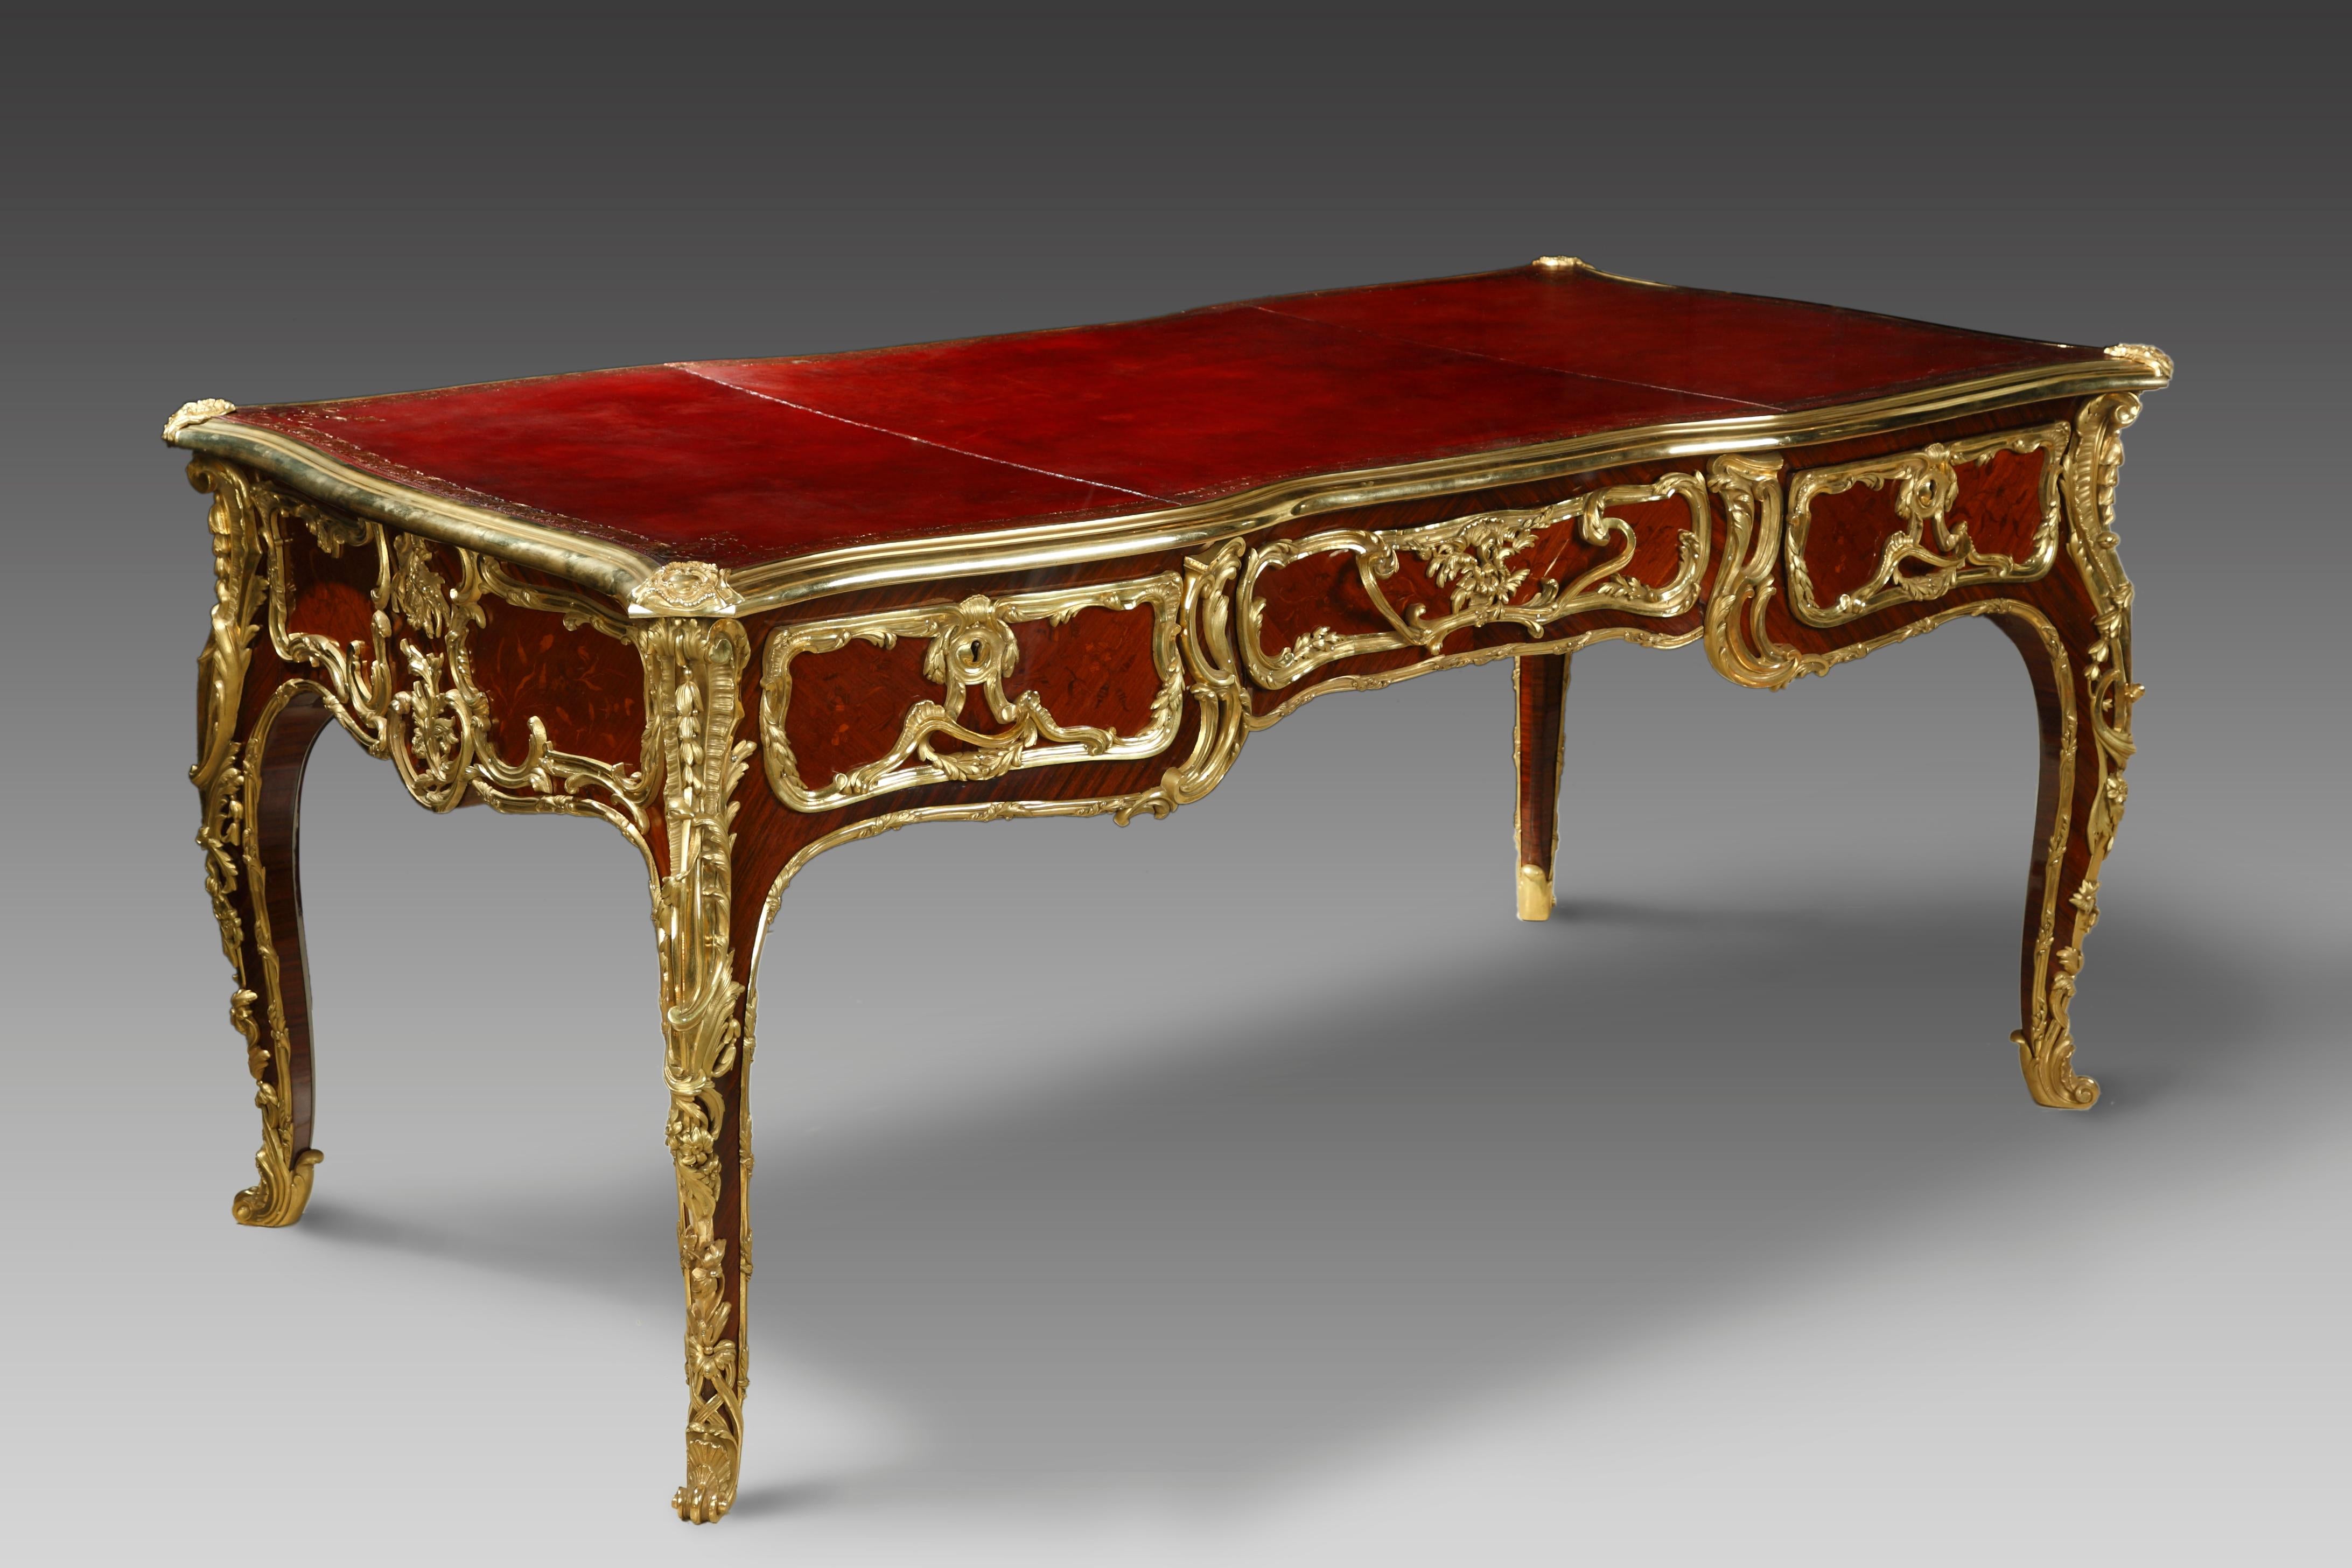 A rare double-side Louis XV style flat desk, made of veneered wood, opening with three drawers decorated with a beautiful flower motif end-cut wood marquetry. With fine chased and gilded bronze enrichments made of rococo motifs. Topped with a tooled